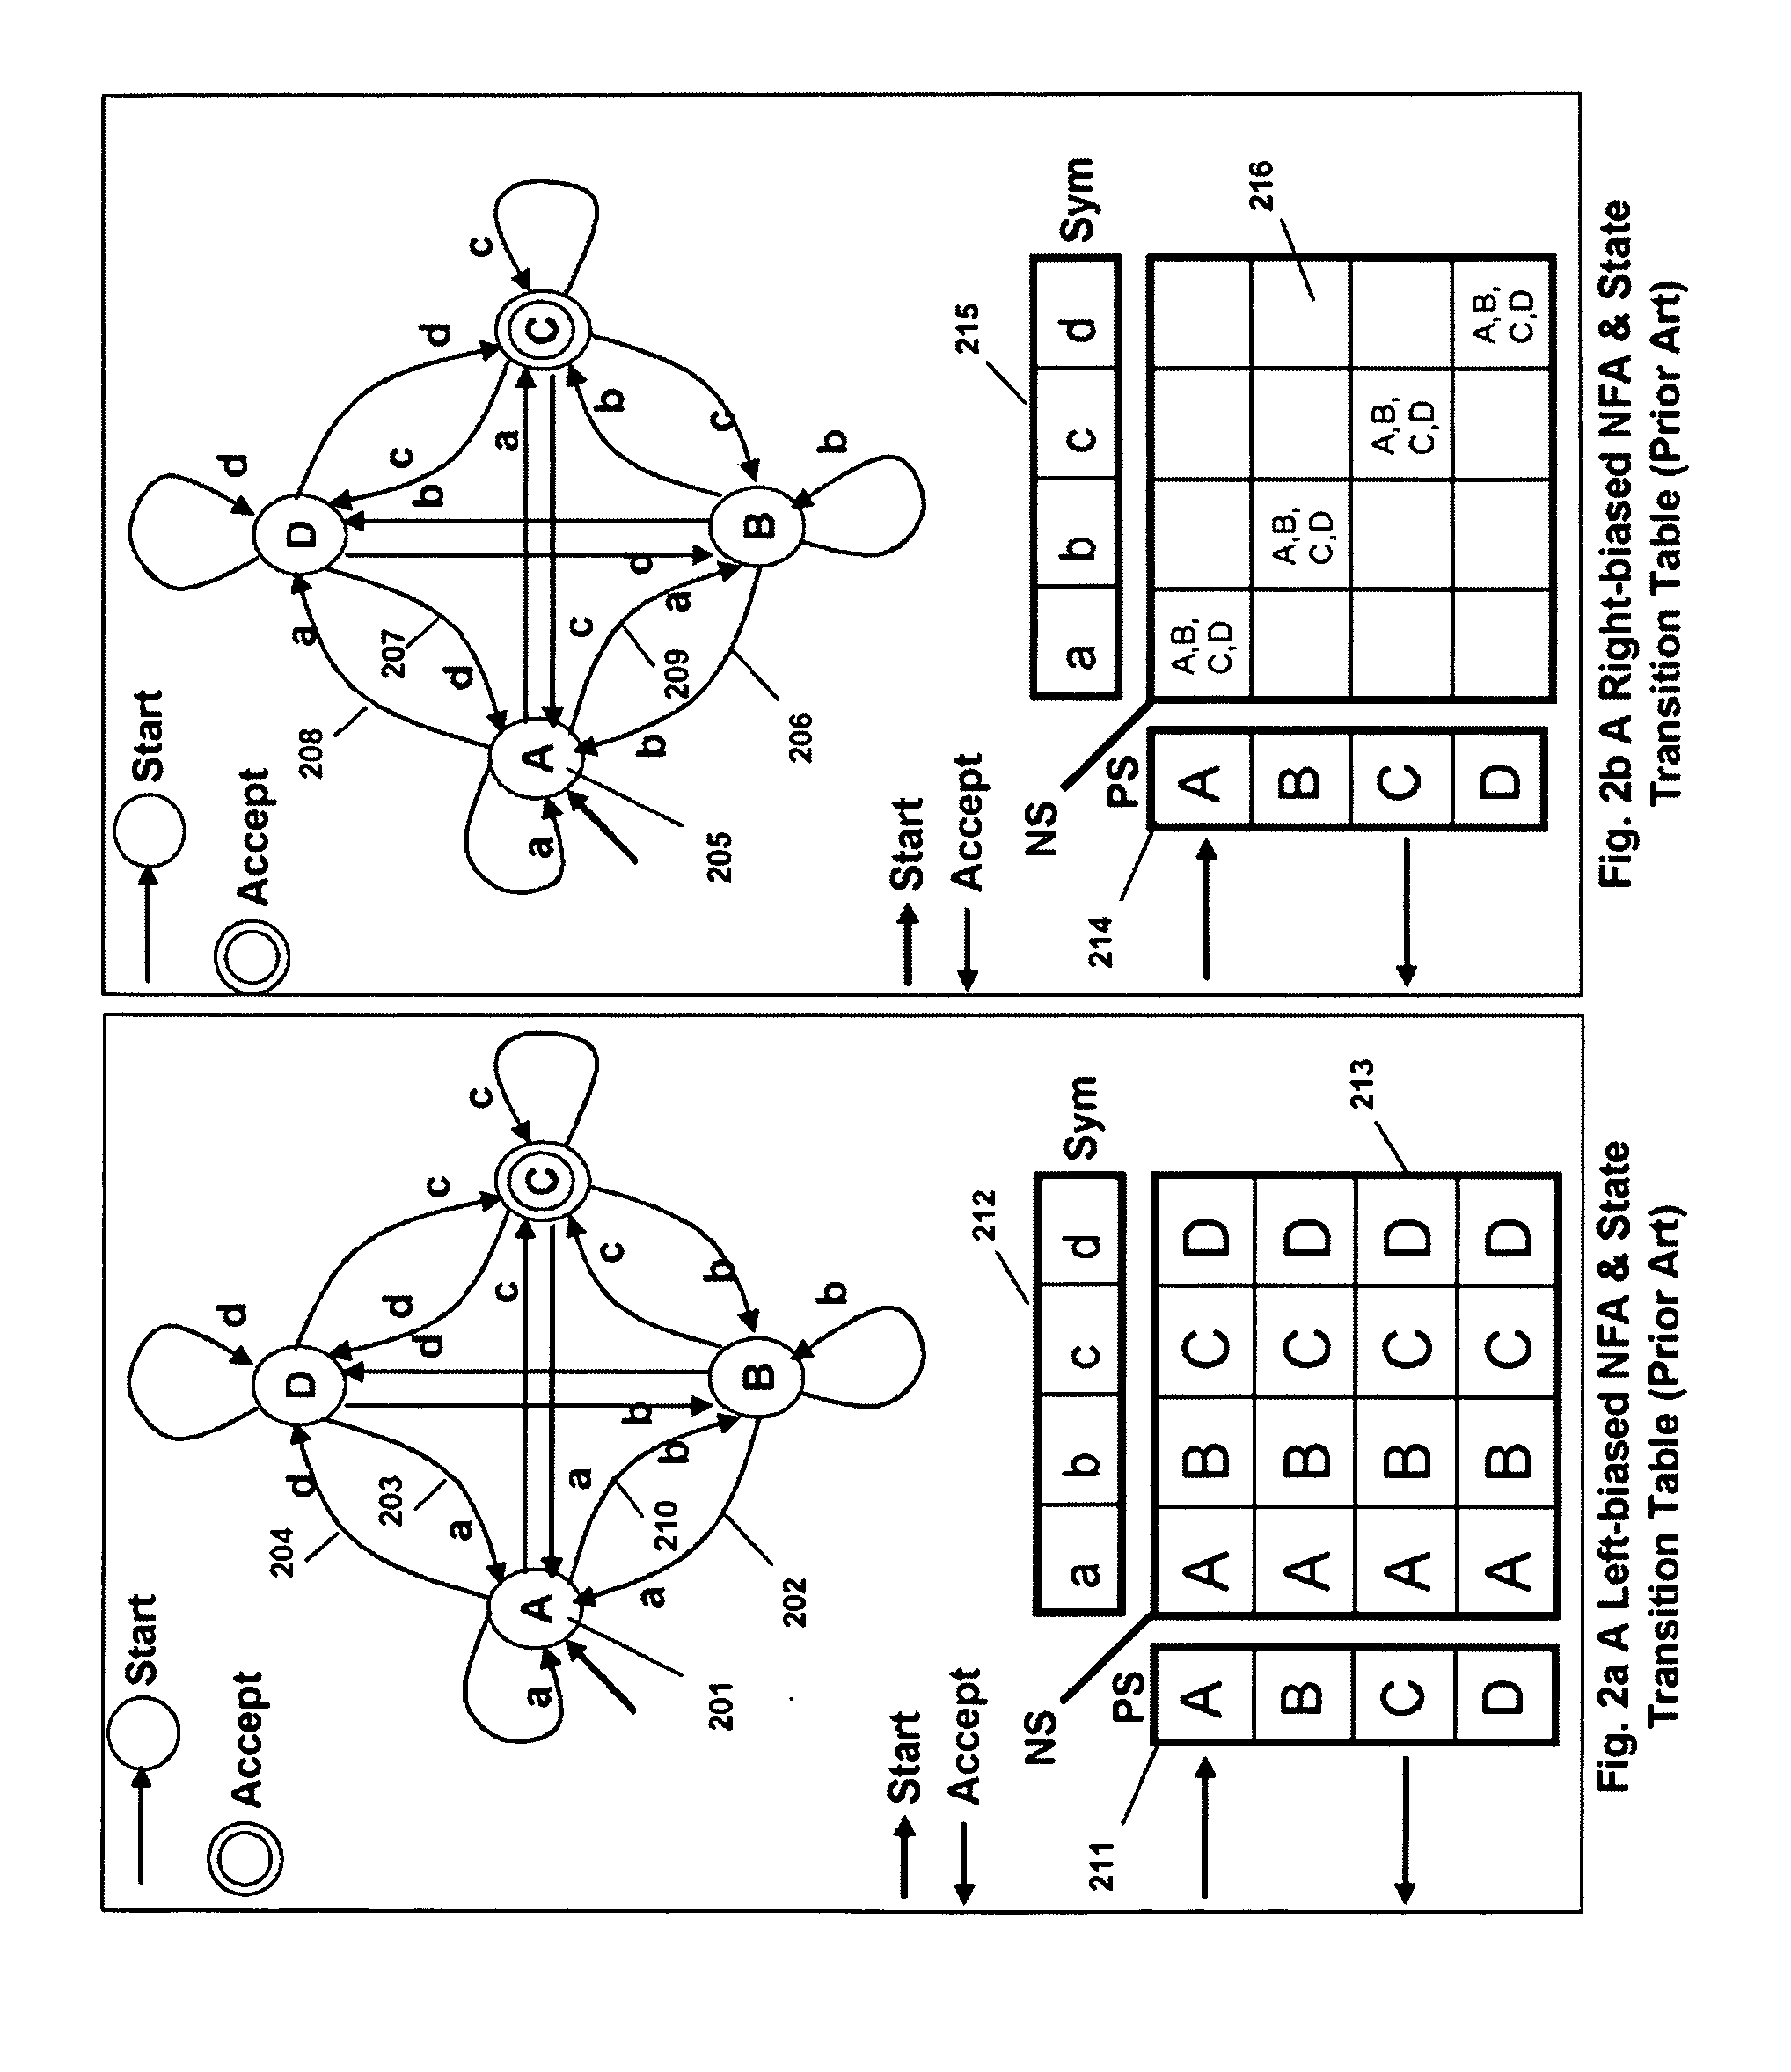 Compiler for Programmable Intelligent Search Memory